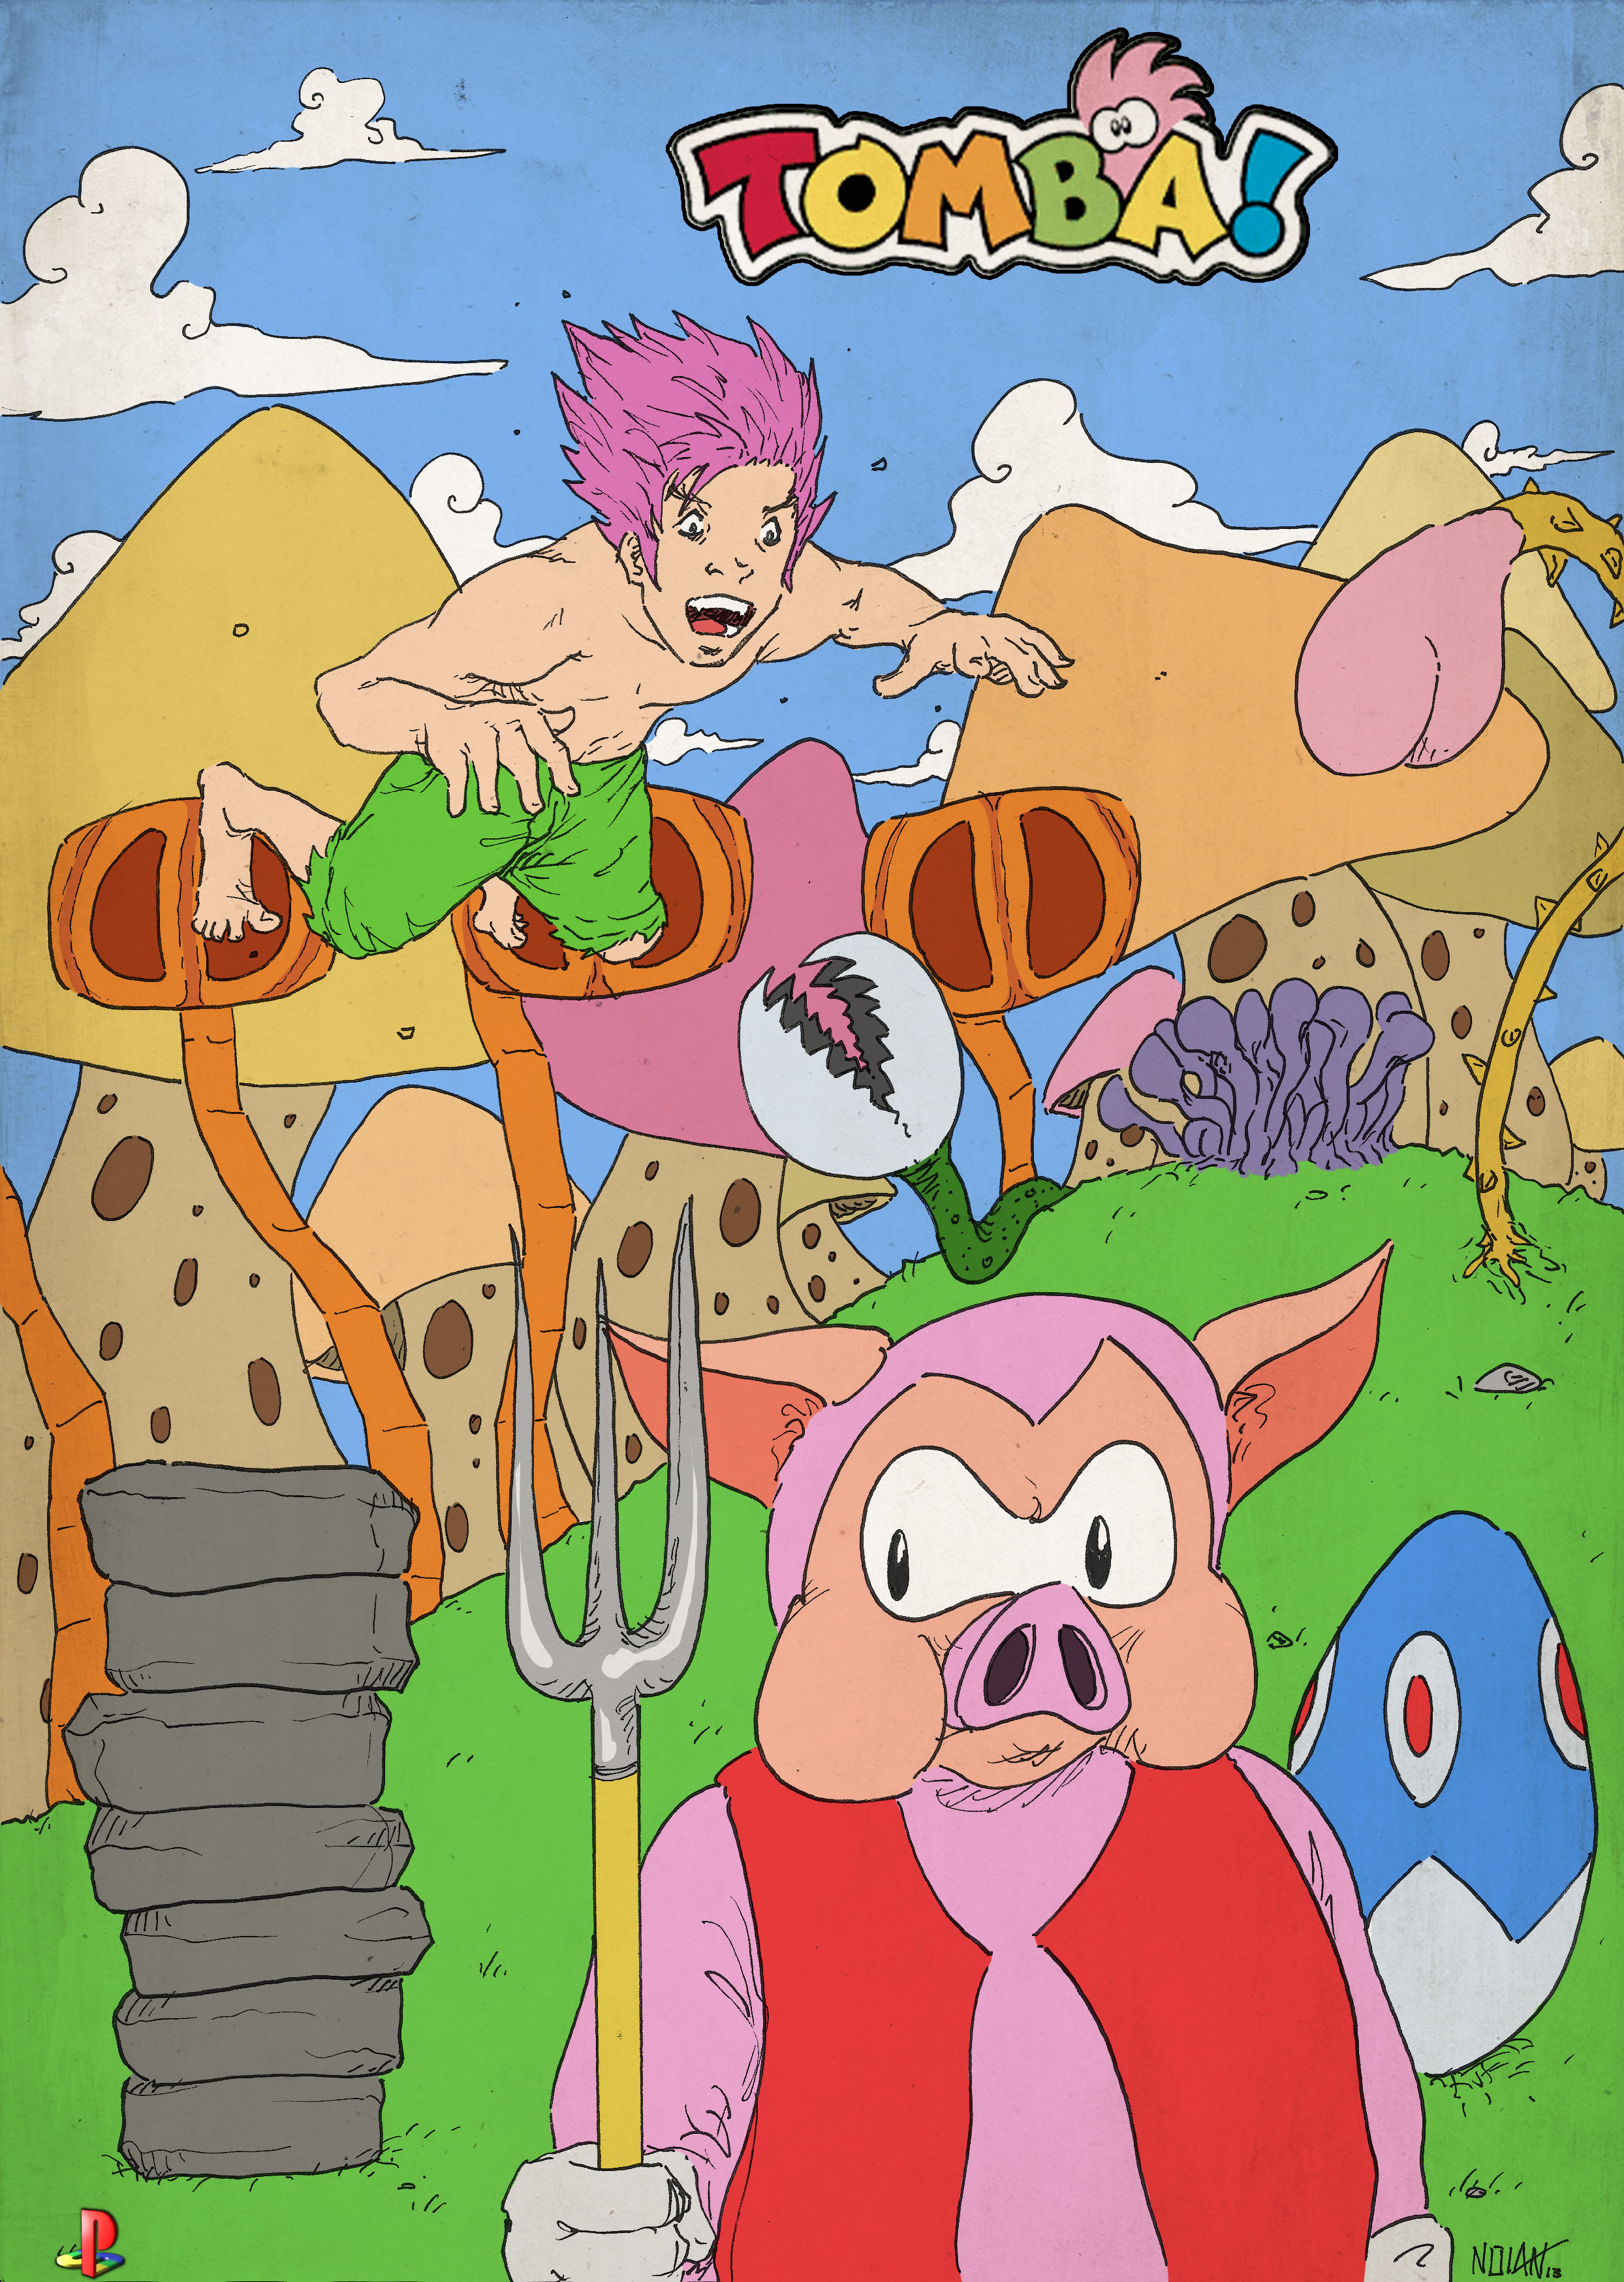 Tomba! Playstation Anniversary Art Tribute on Game-Art-HQ